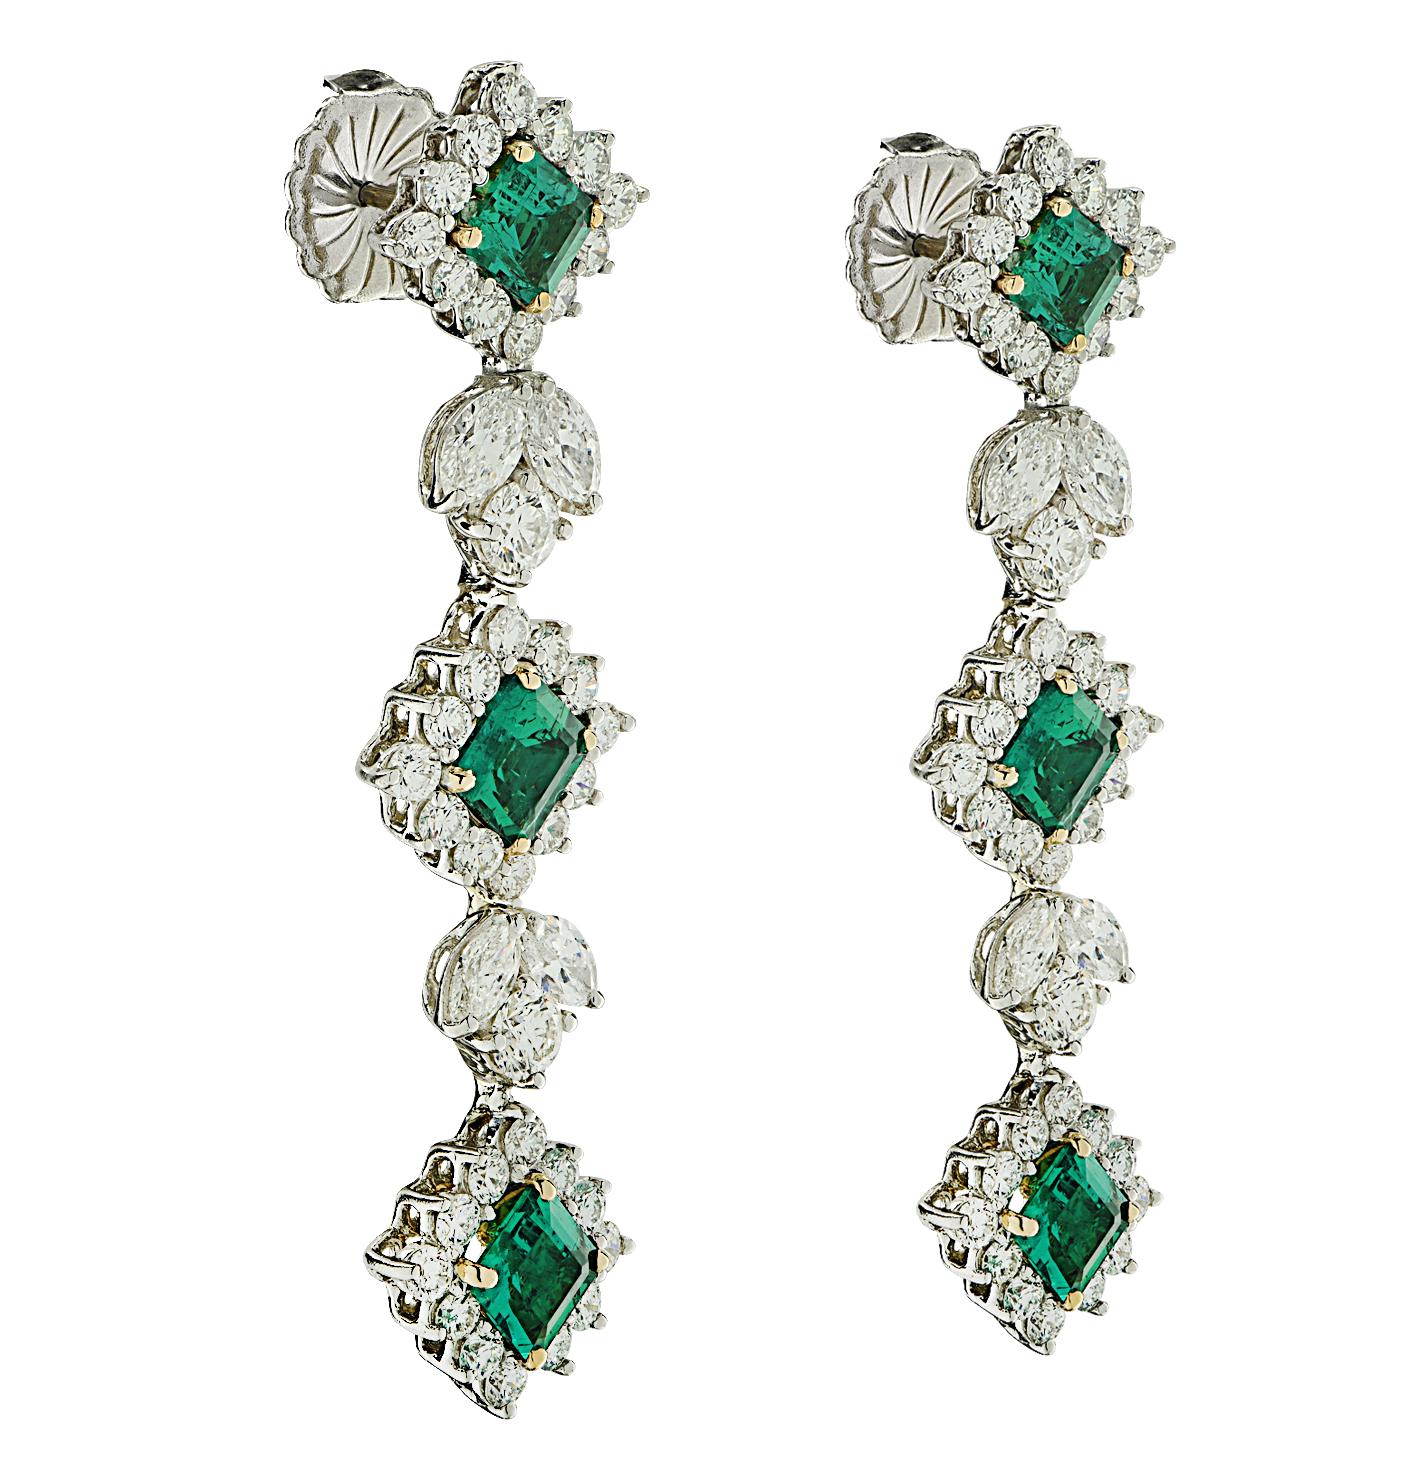 Spectacular Emerald and Diamond dangle earrings crafted in Platinum and 18 karat yellow gold, showcasing 6 square emerald cut green emeralds weighing approximately 3.93 carats total, and 82 mixed round brilliant cut and marquise cut diamonds